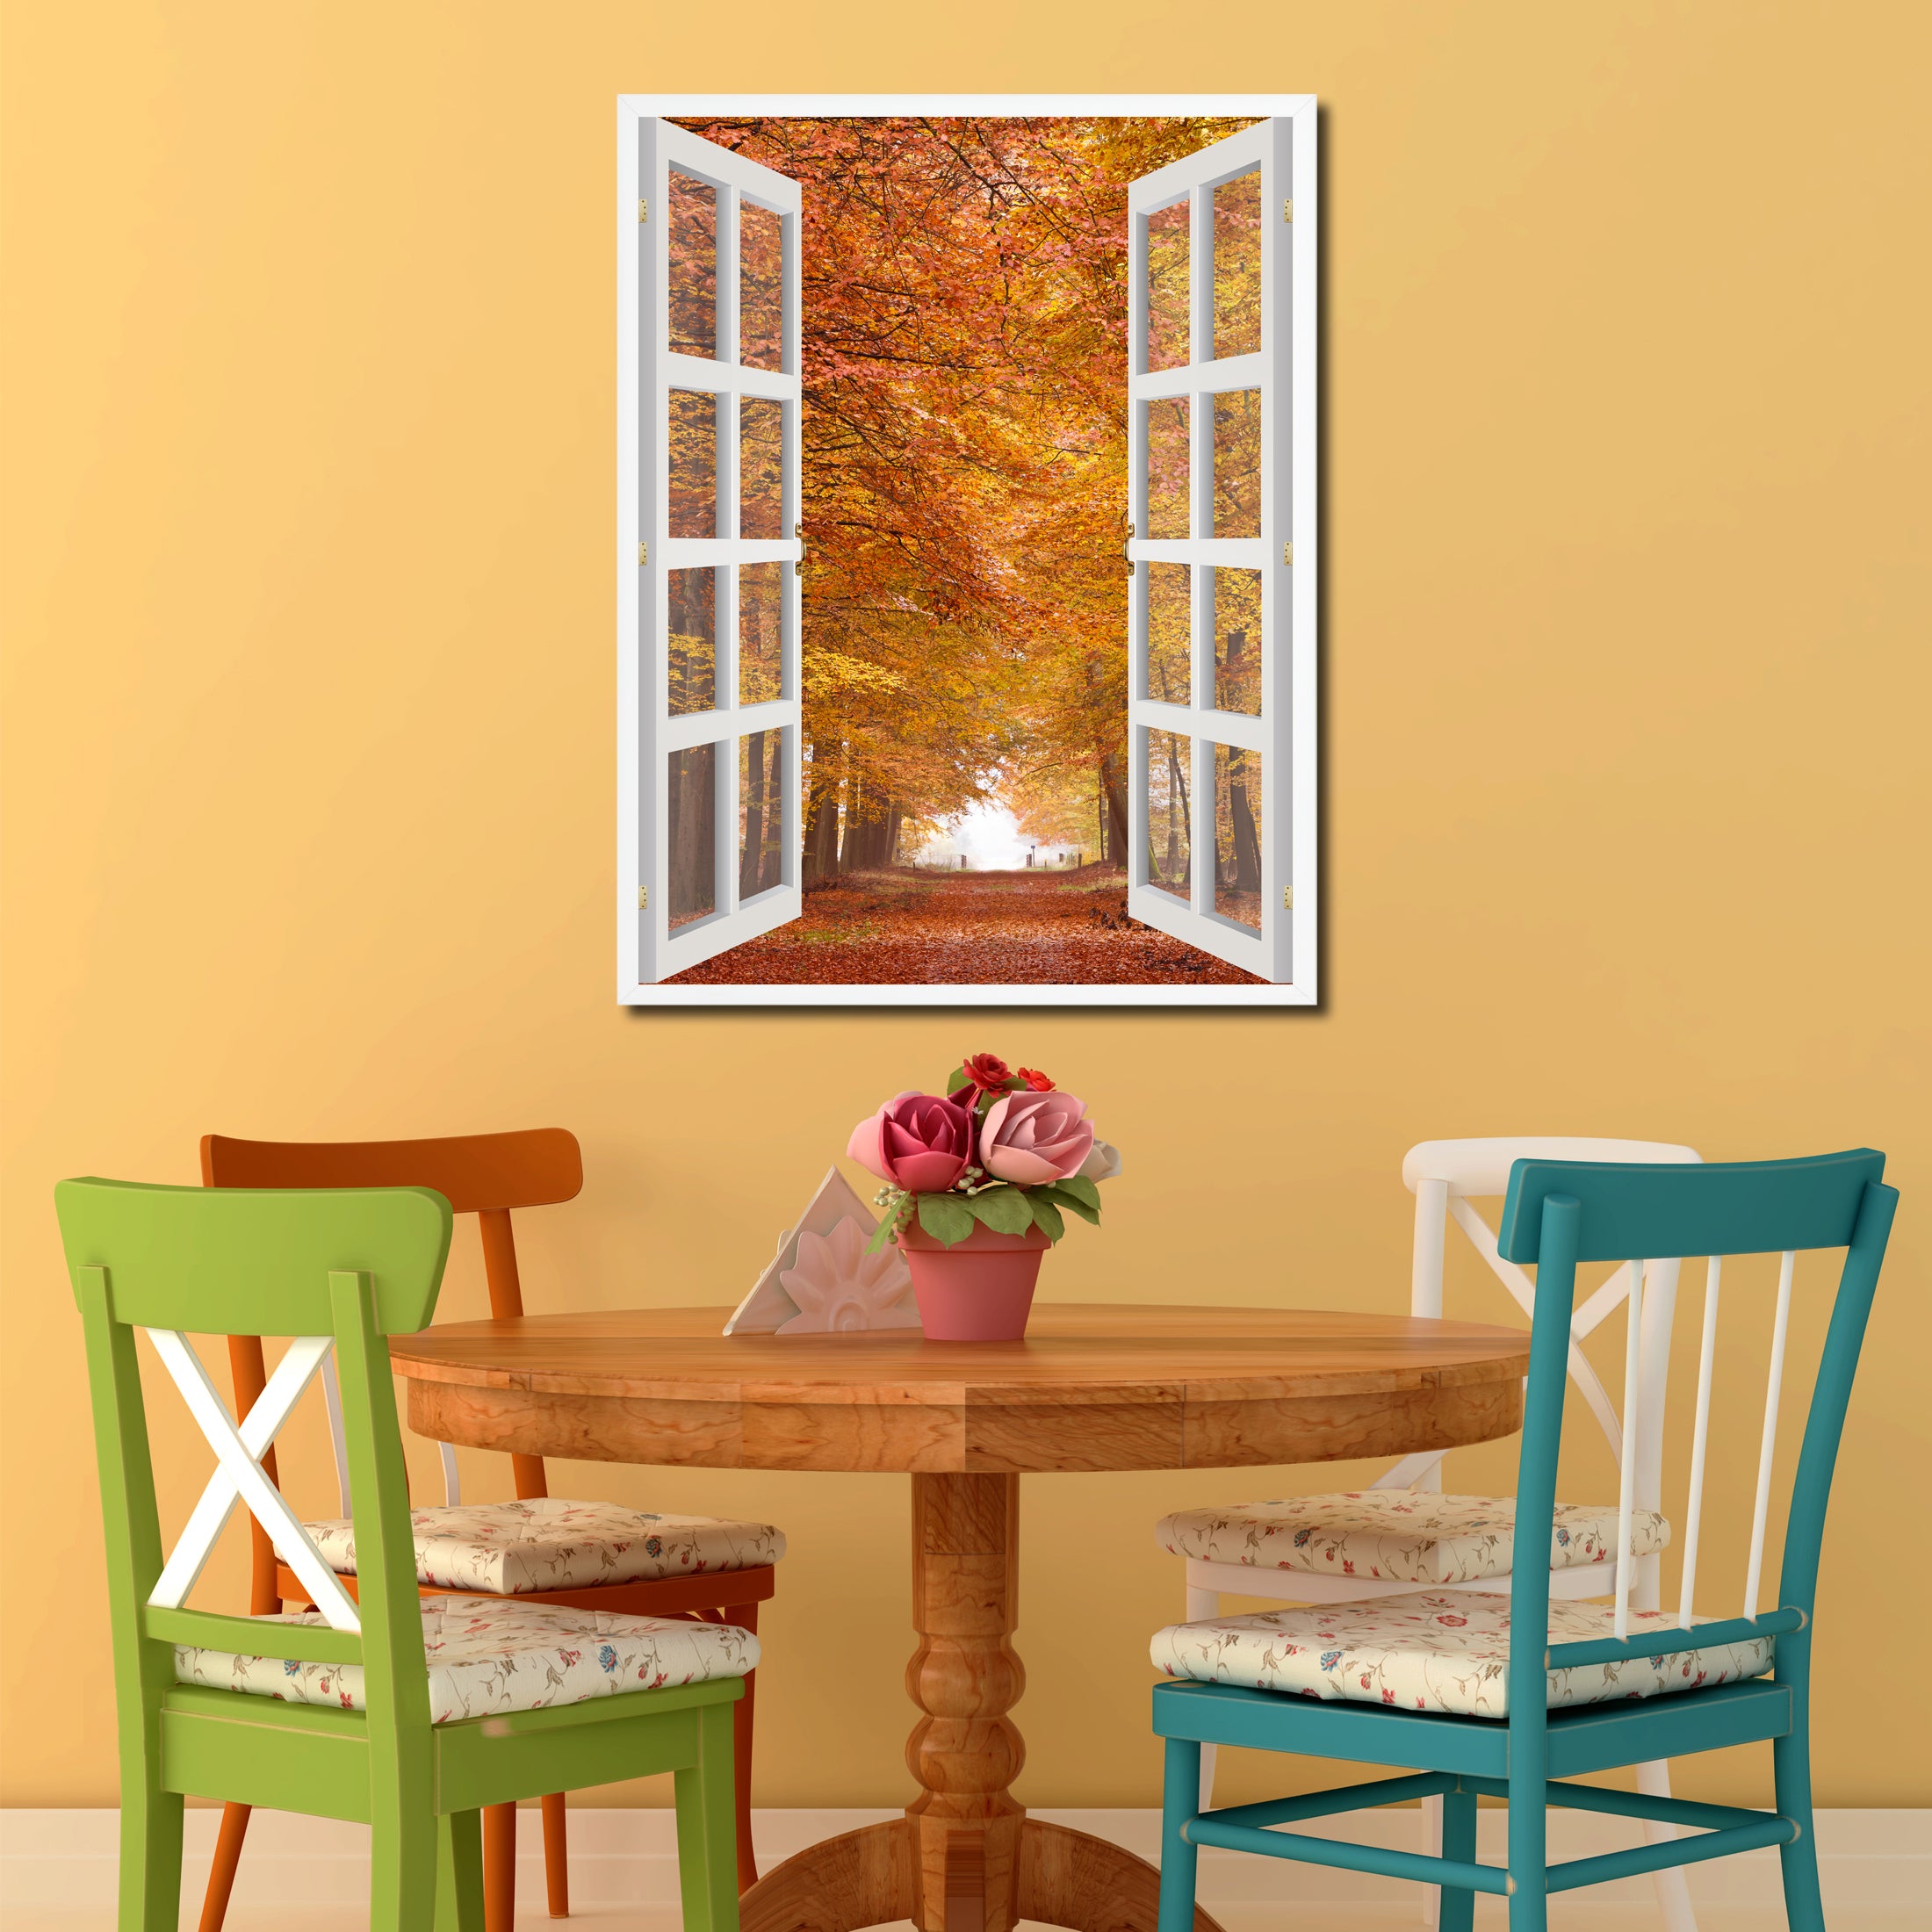 Autumn Trees Red Leaves Picture French Window Canvas Print with Frame Gifts Home Decor Wall Art Collection